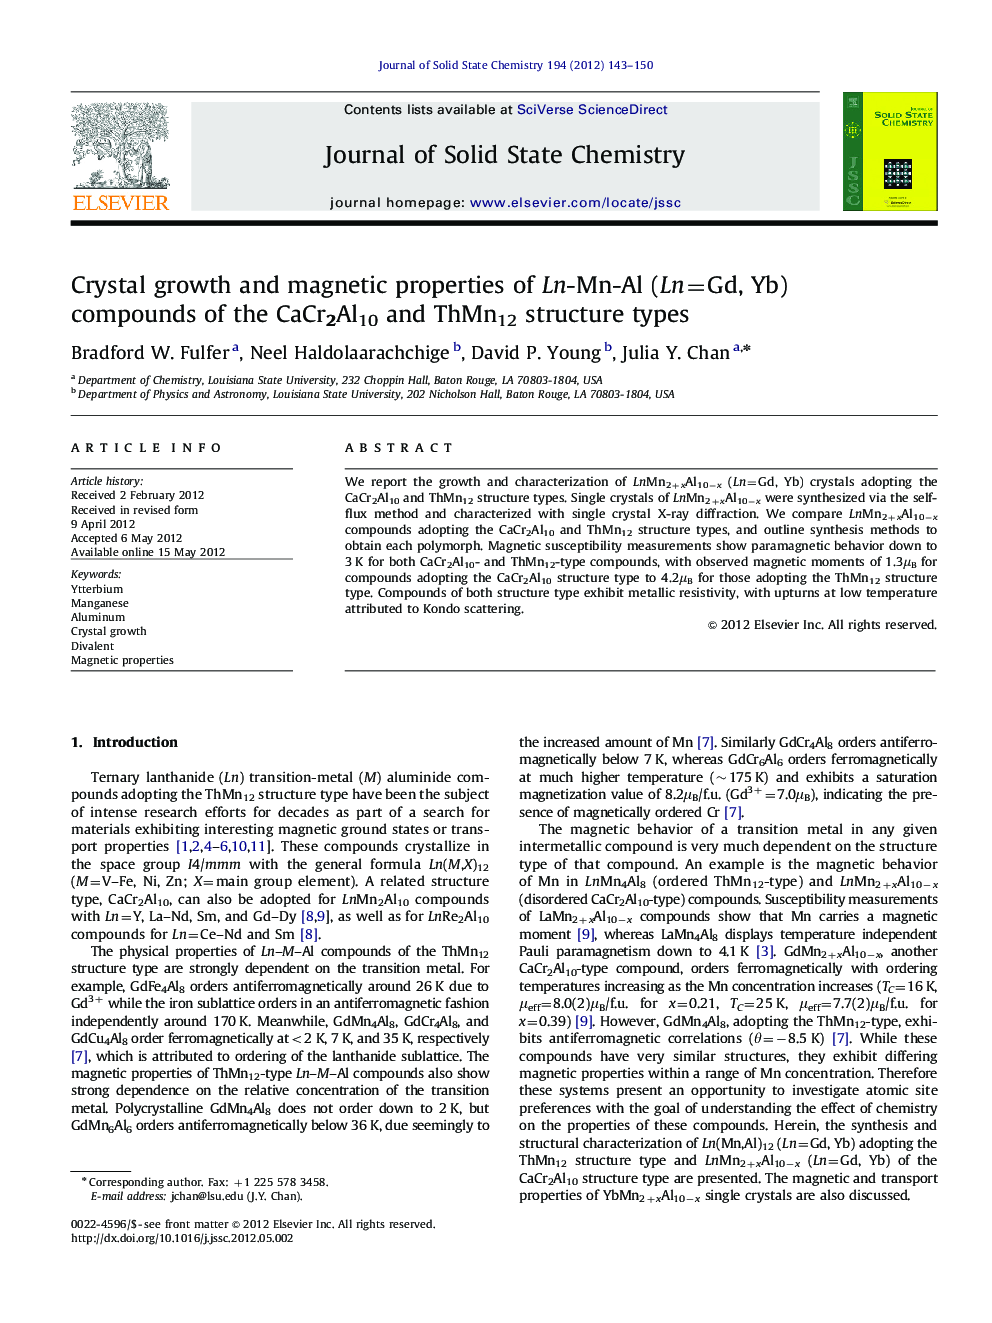 Crystal growth and magnetic properties of Ln-Mn-Al (Ln=Gd, Yb) compounds of the CaCr2Al10 and ThMn12 structure types